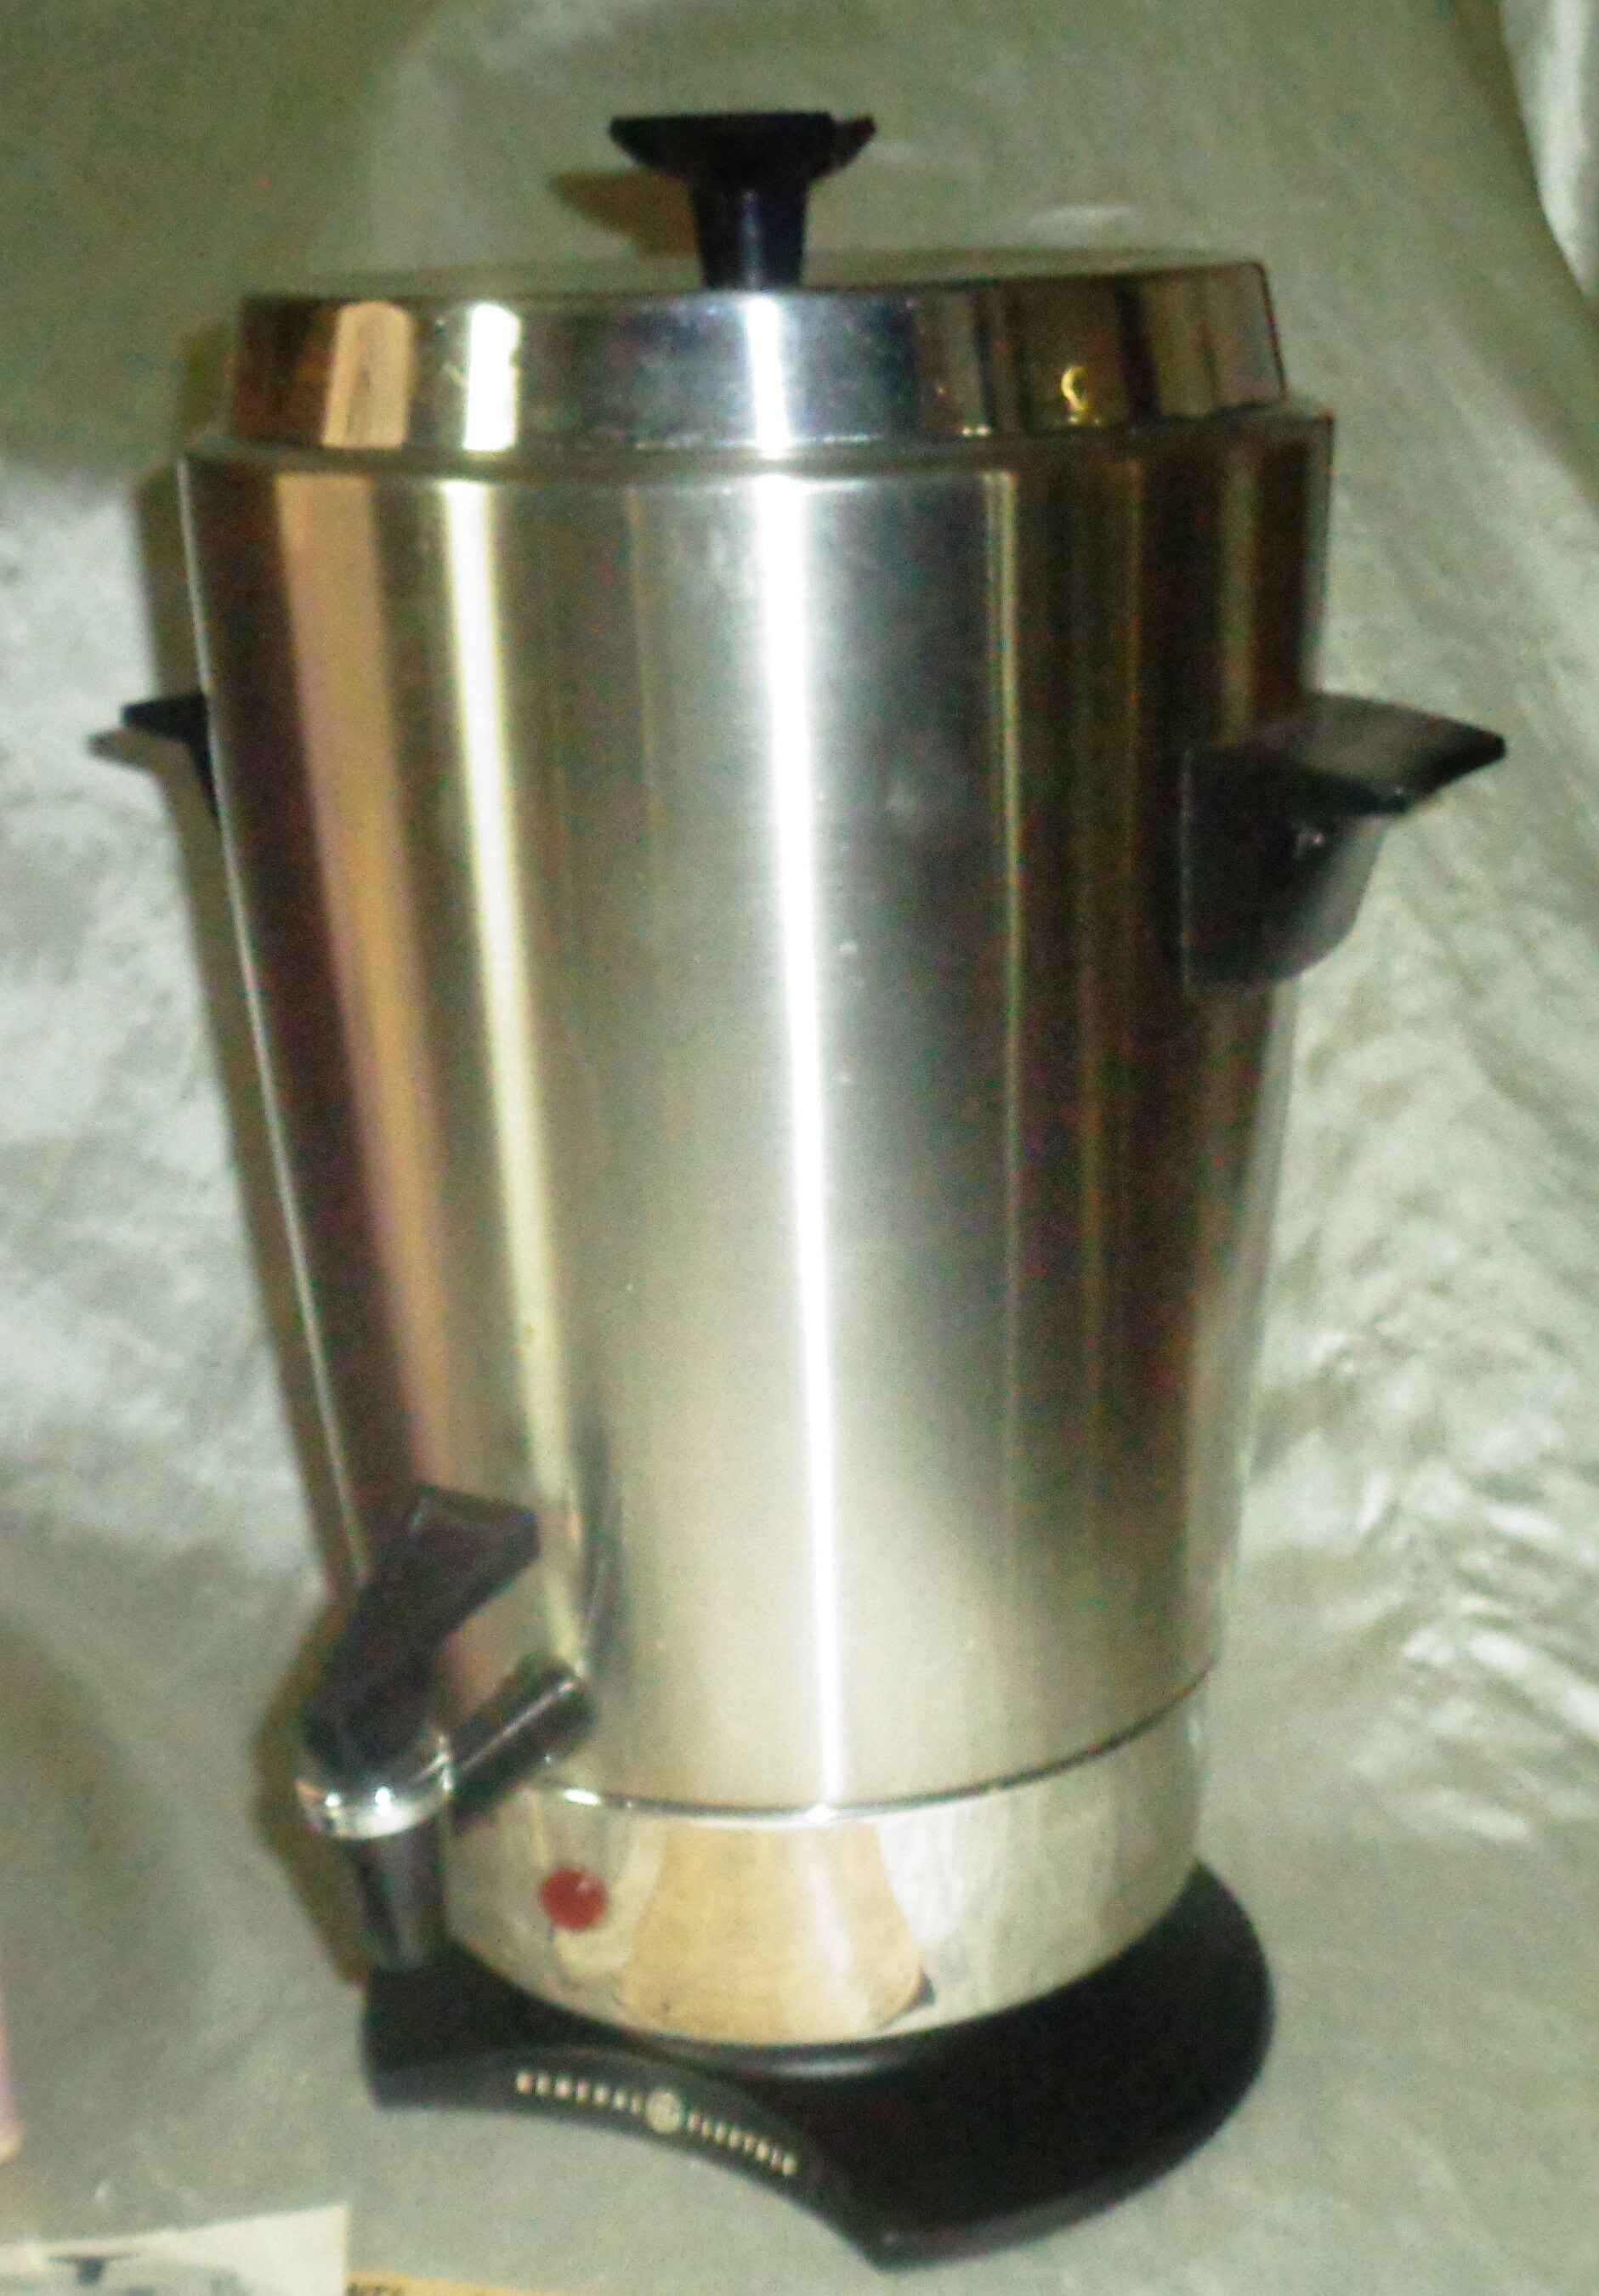 GE Automatic Electric Coffee Maker Pot Urn Serve 30 Cup Stainless Steel  WORKING!